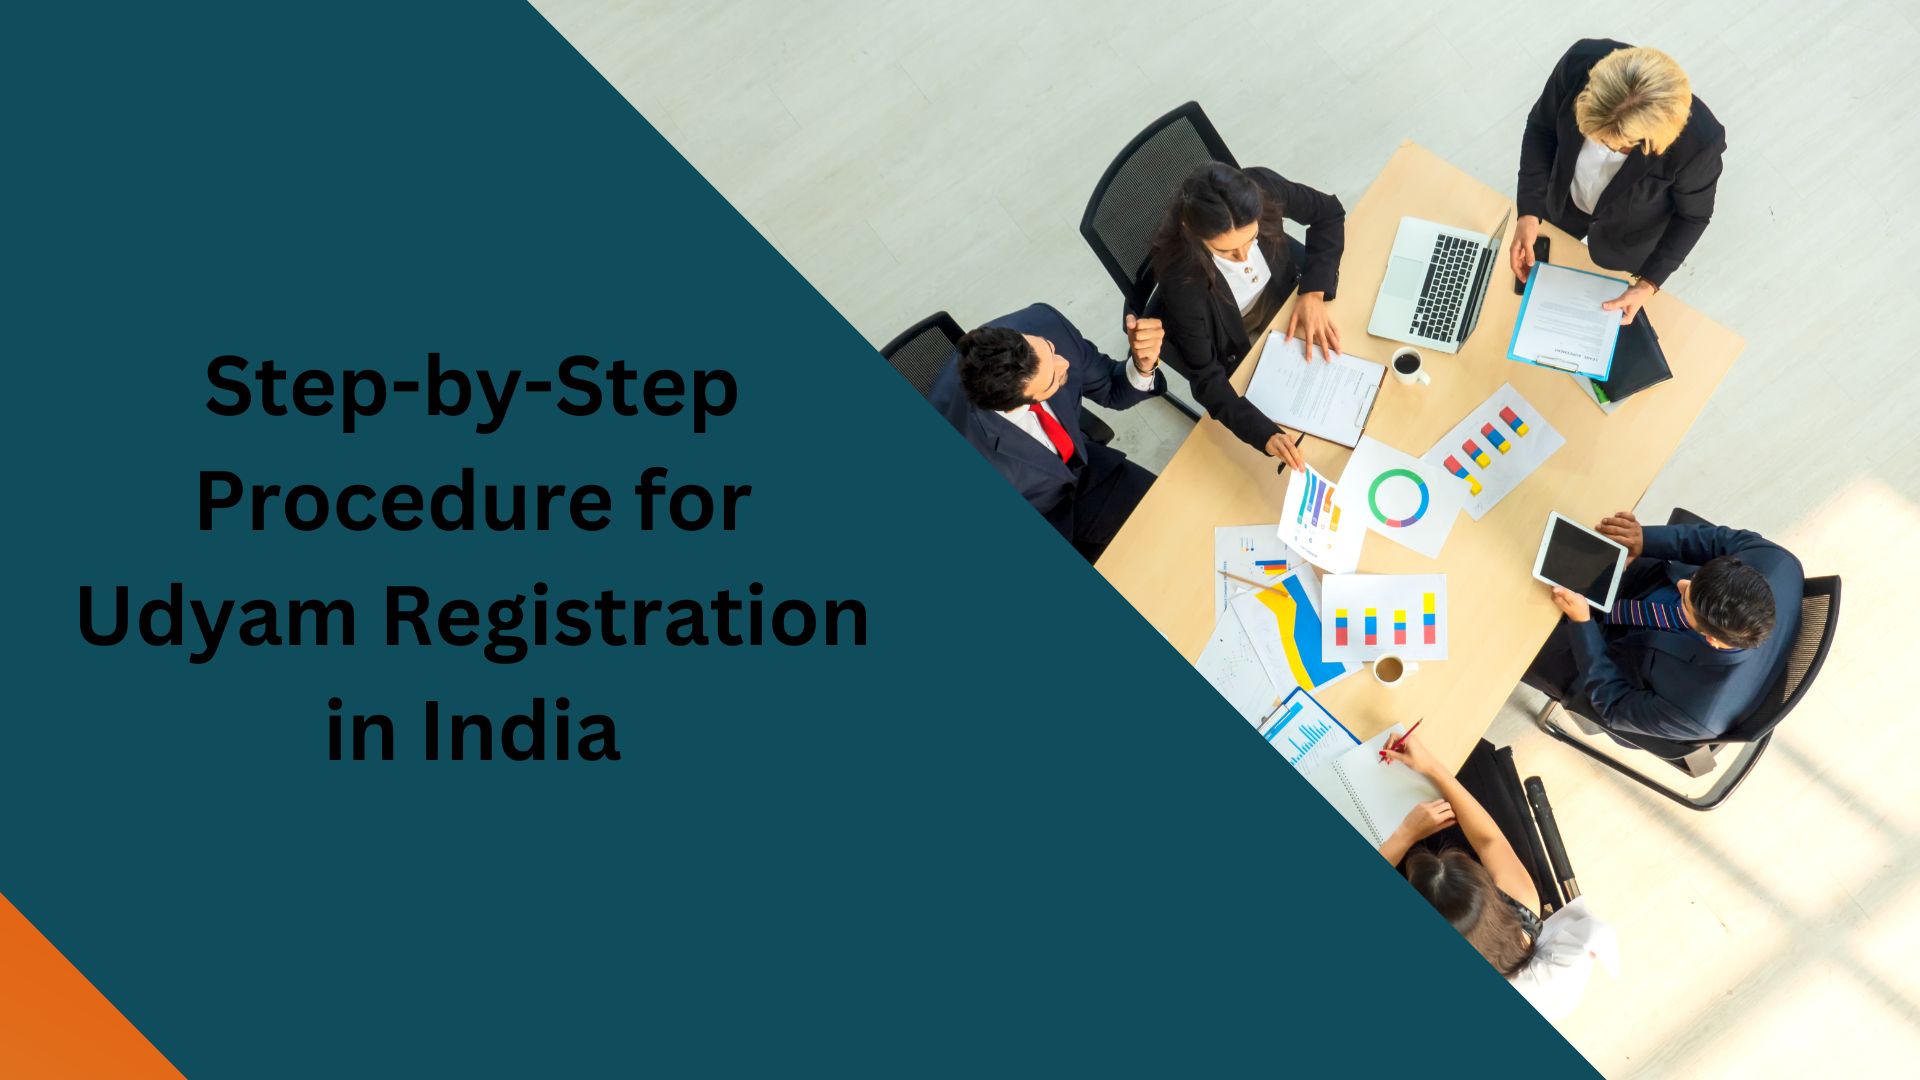 Step-by-Step Procedure for Udyam Registration in India